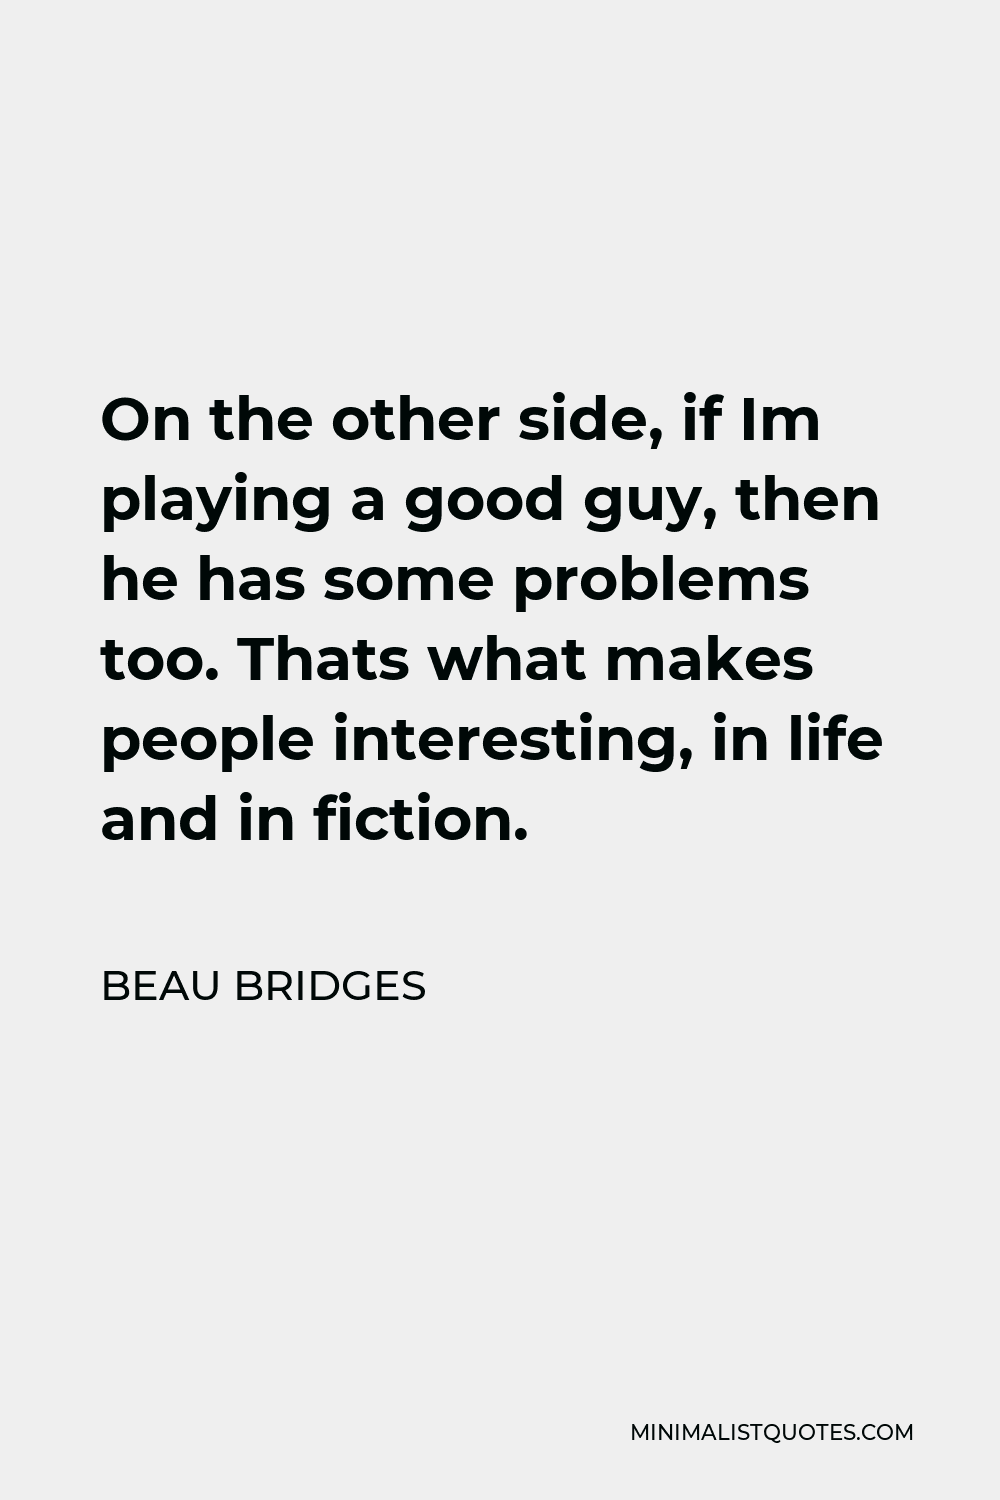 Beau Bridges Quote - On the other side, if Im playing a good guy, then he has some problems too. Thats what makes people interesting, in life and in fiction.